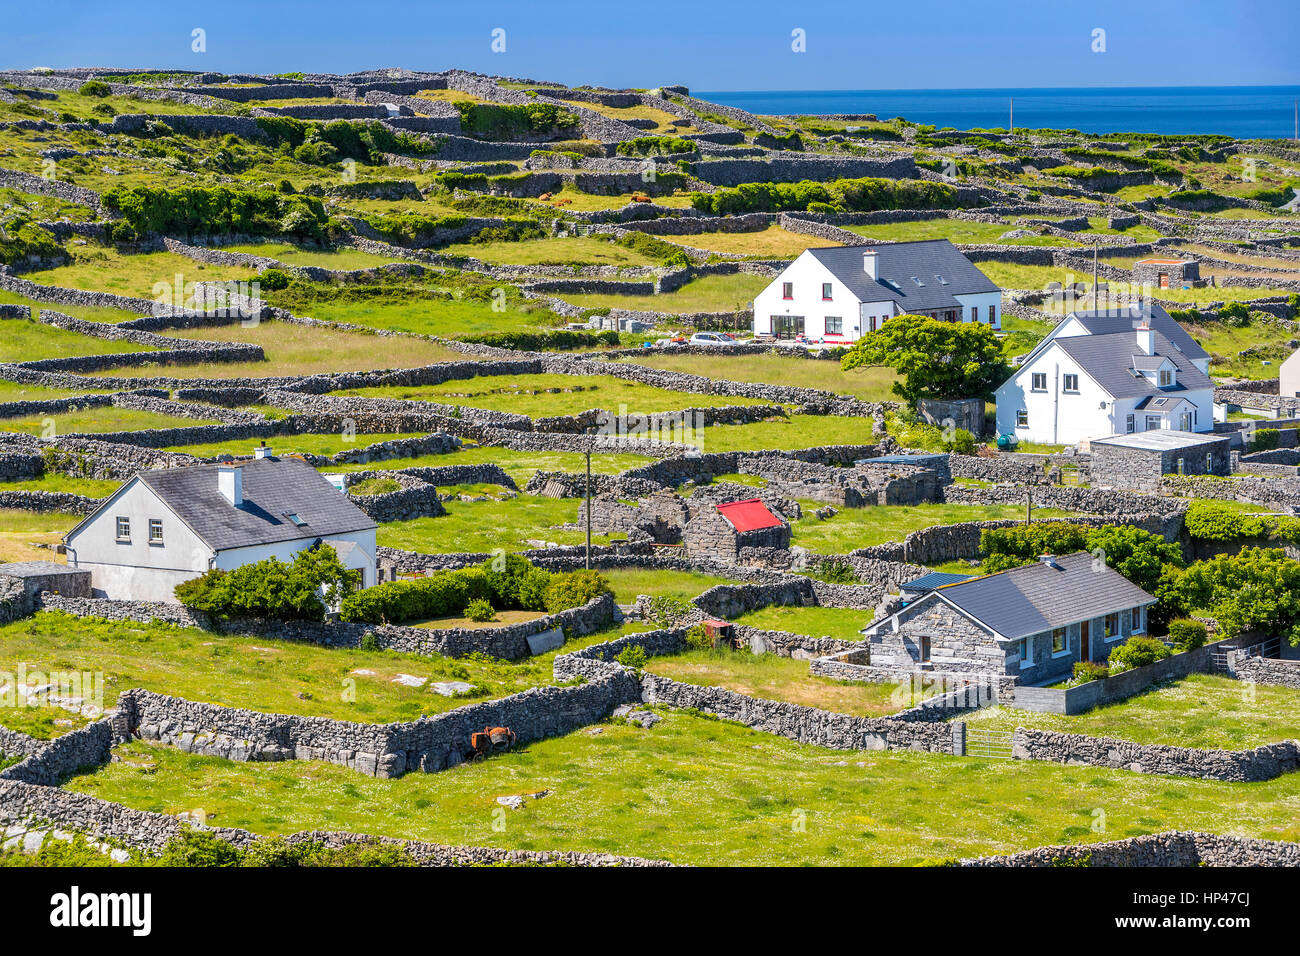 Inis Oirr, County Galway, Ireland, Europe. Stock Photo